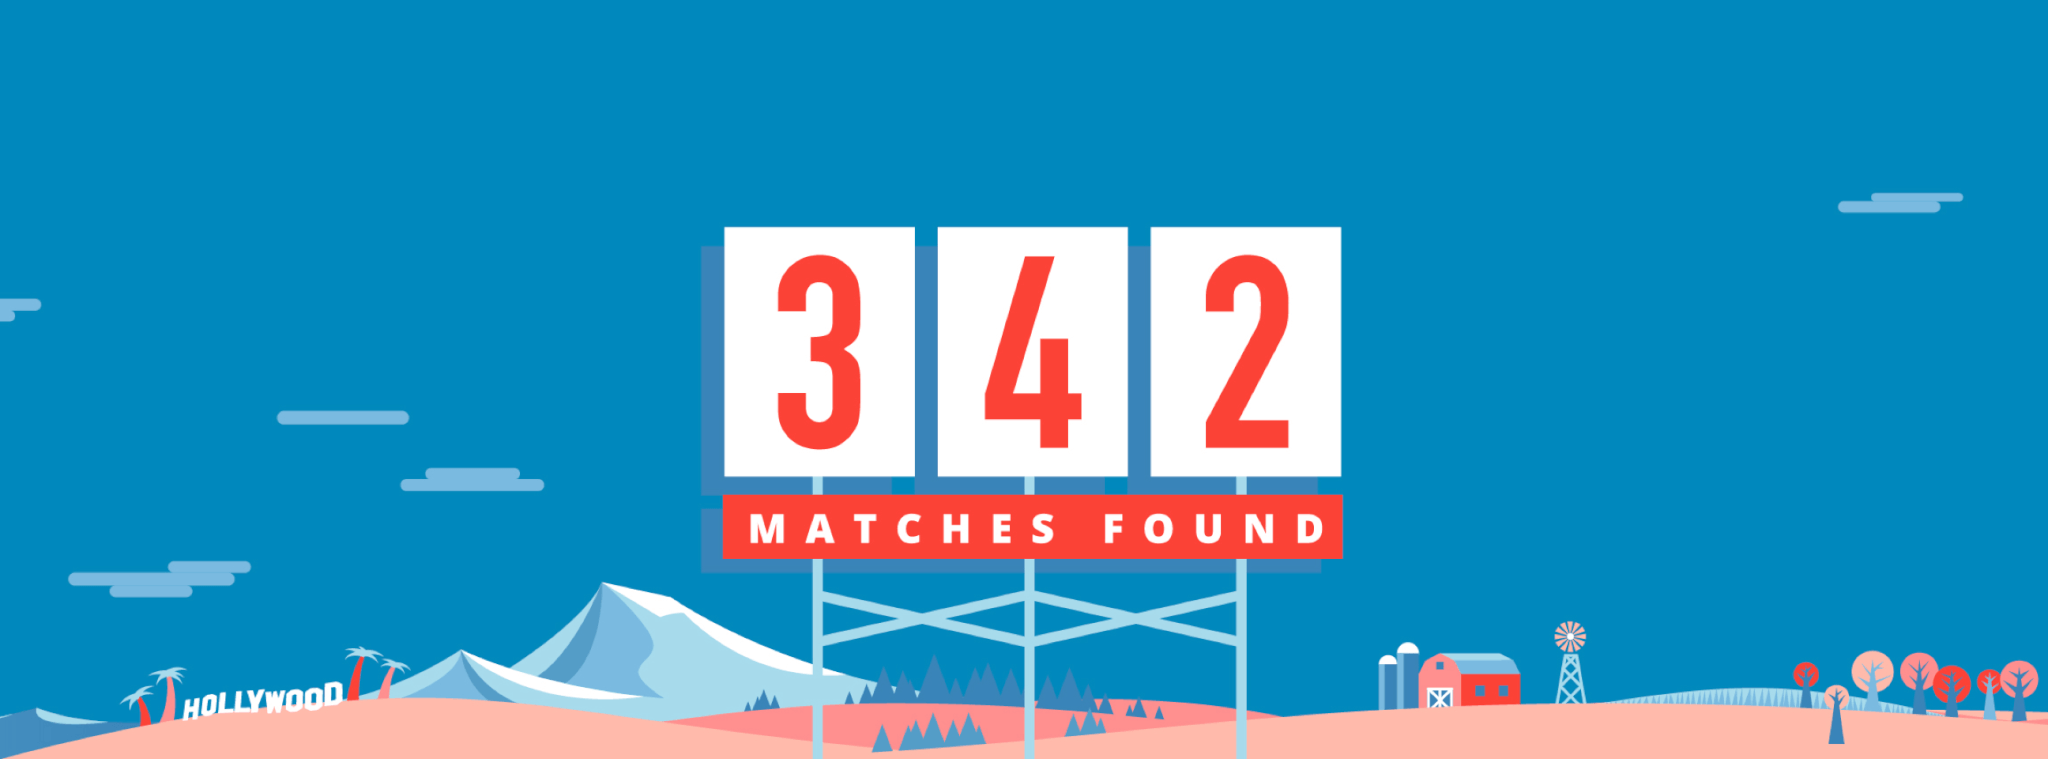 Sharing America's Marrow 342 matches found